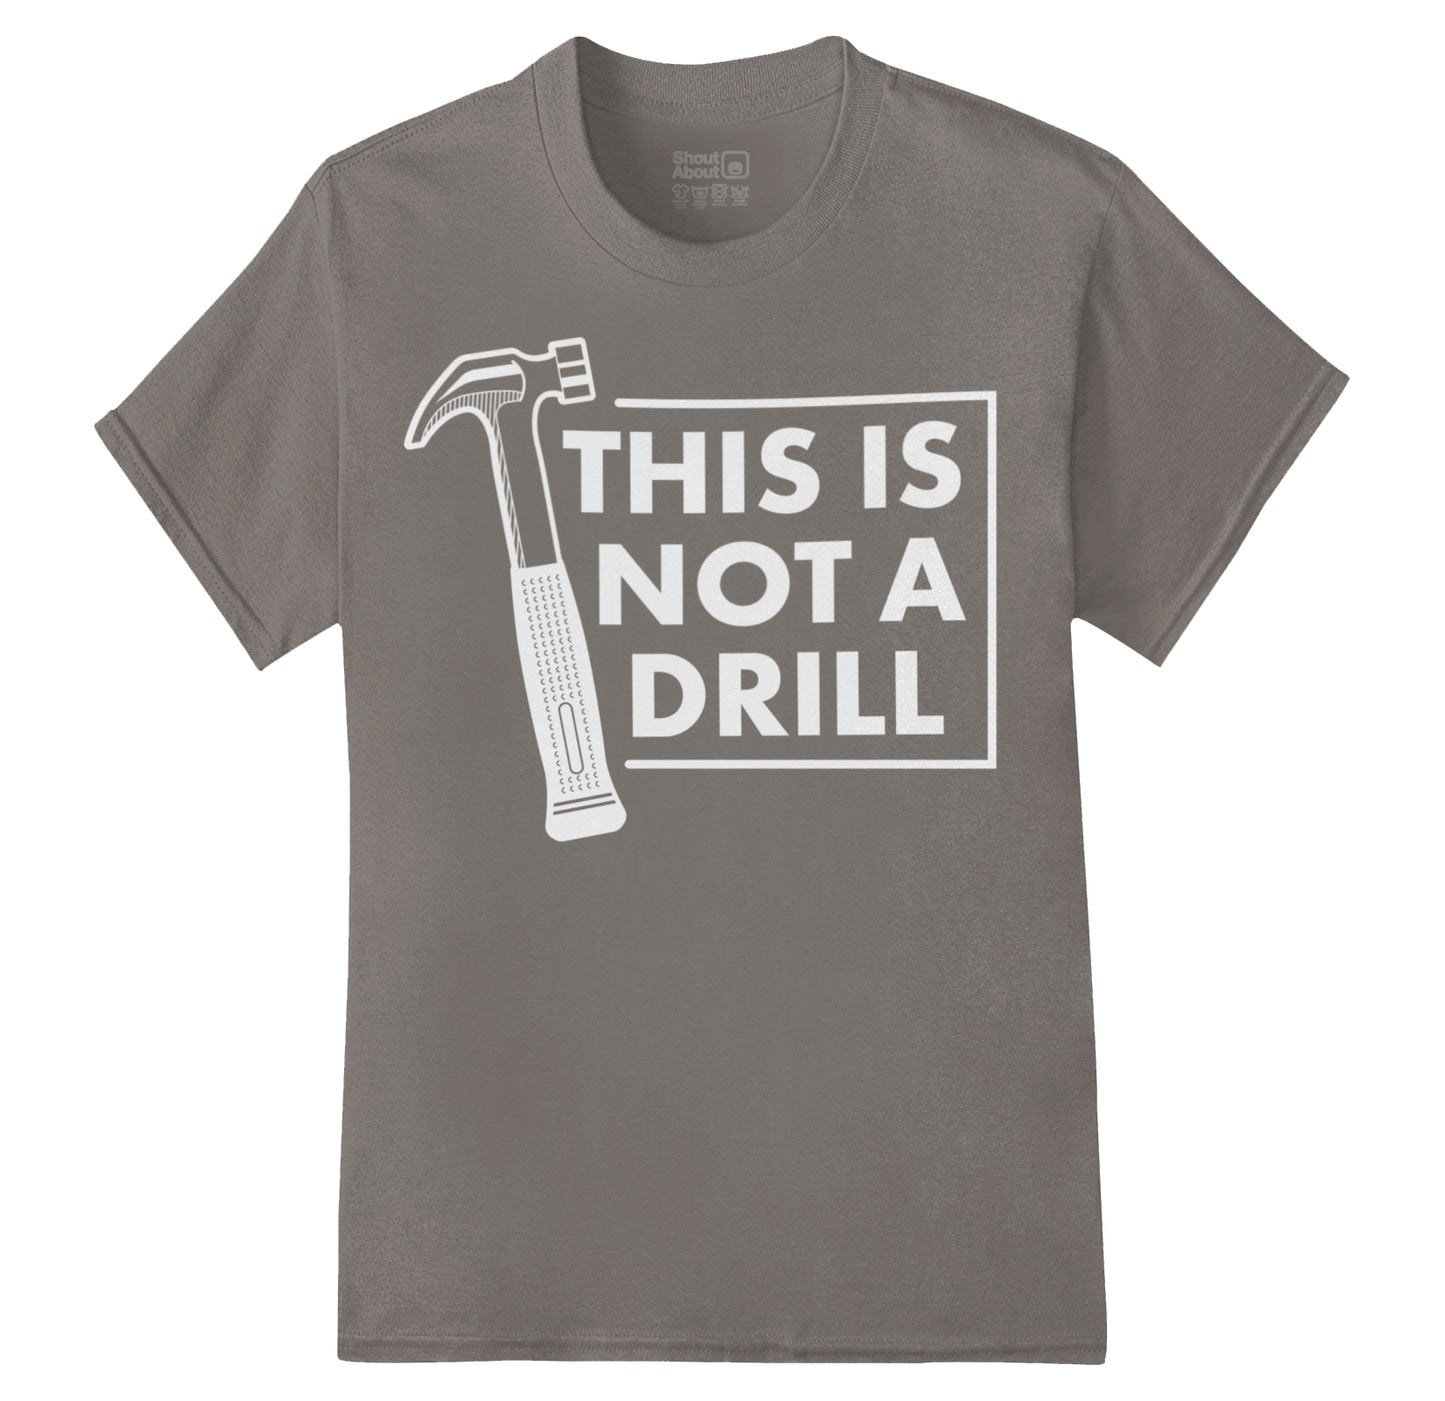 This is not a Drill T-Shirt